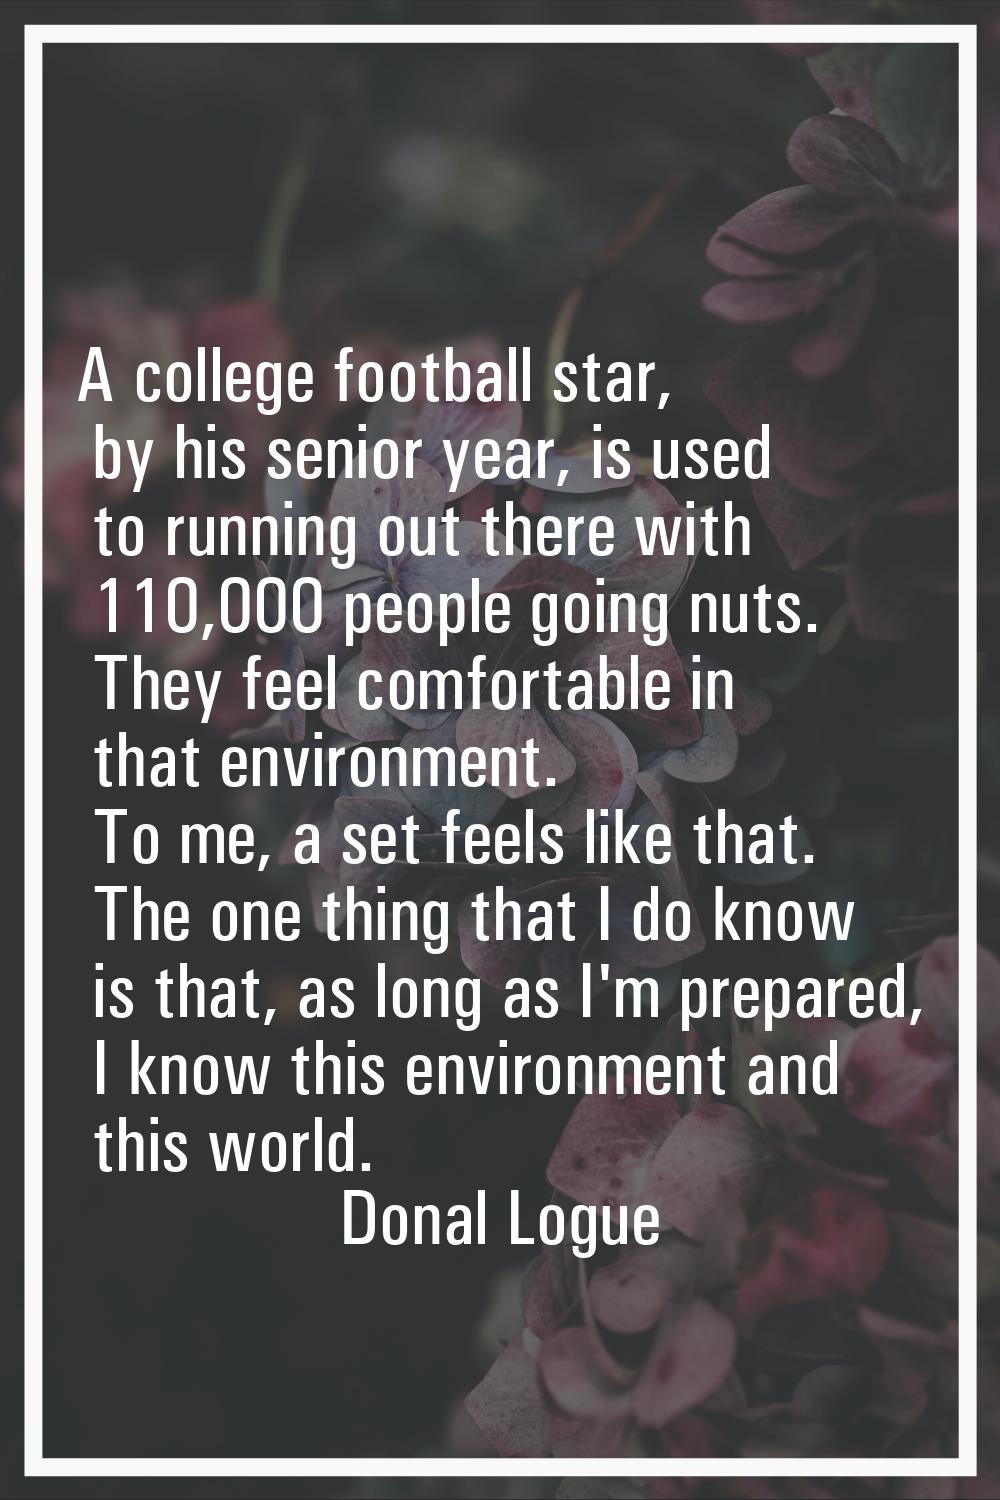 A college football star, by his senior year, is used to running out there with 110,000 people going